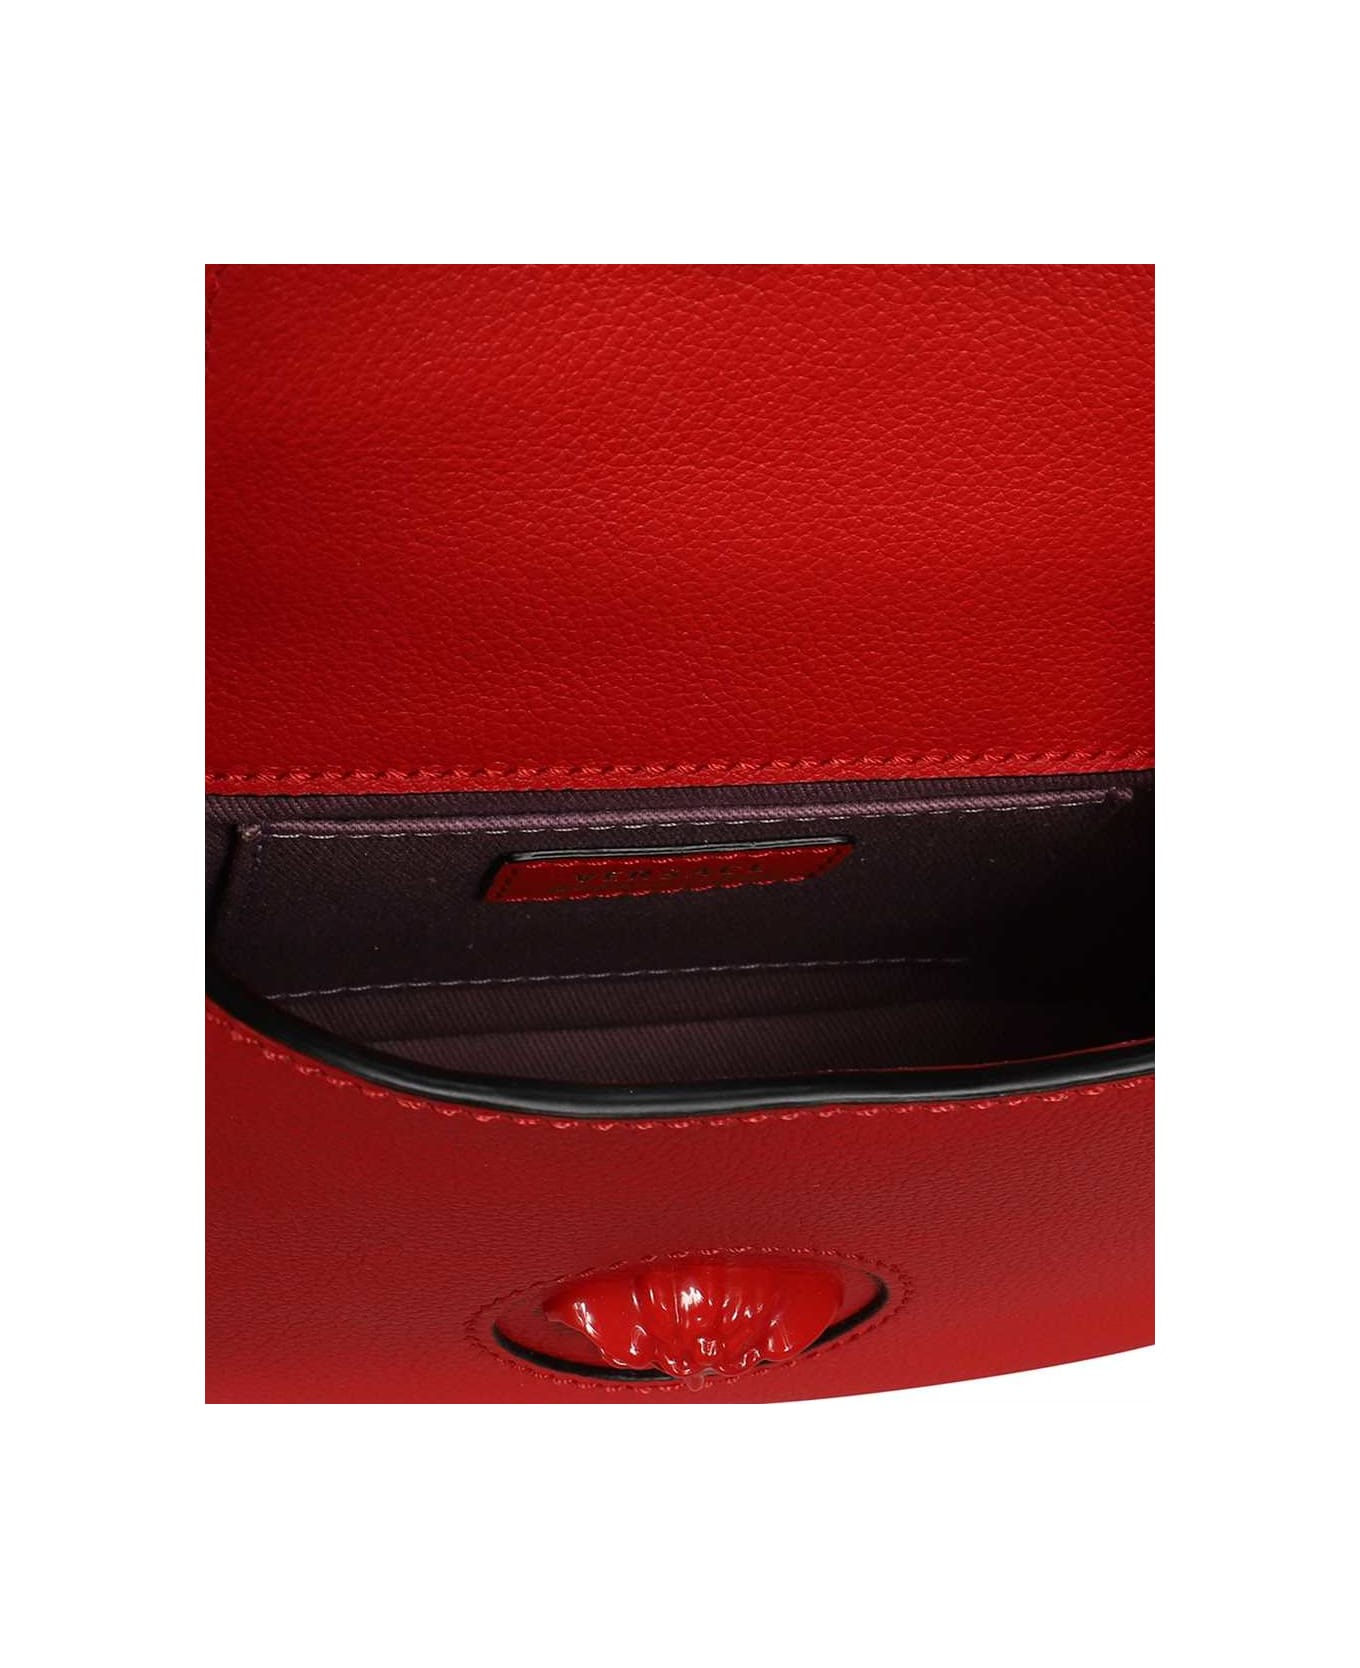 Versace Leather Crossbody Bag - red